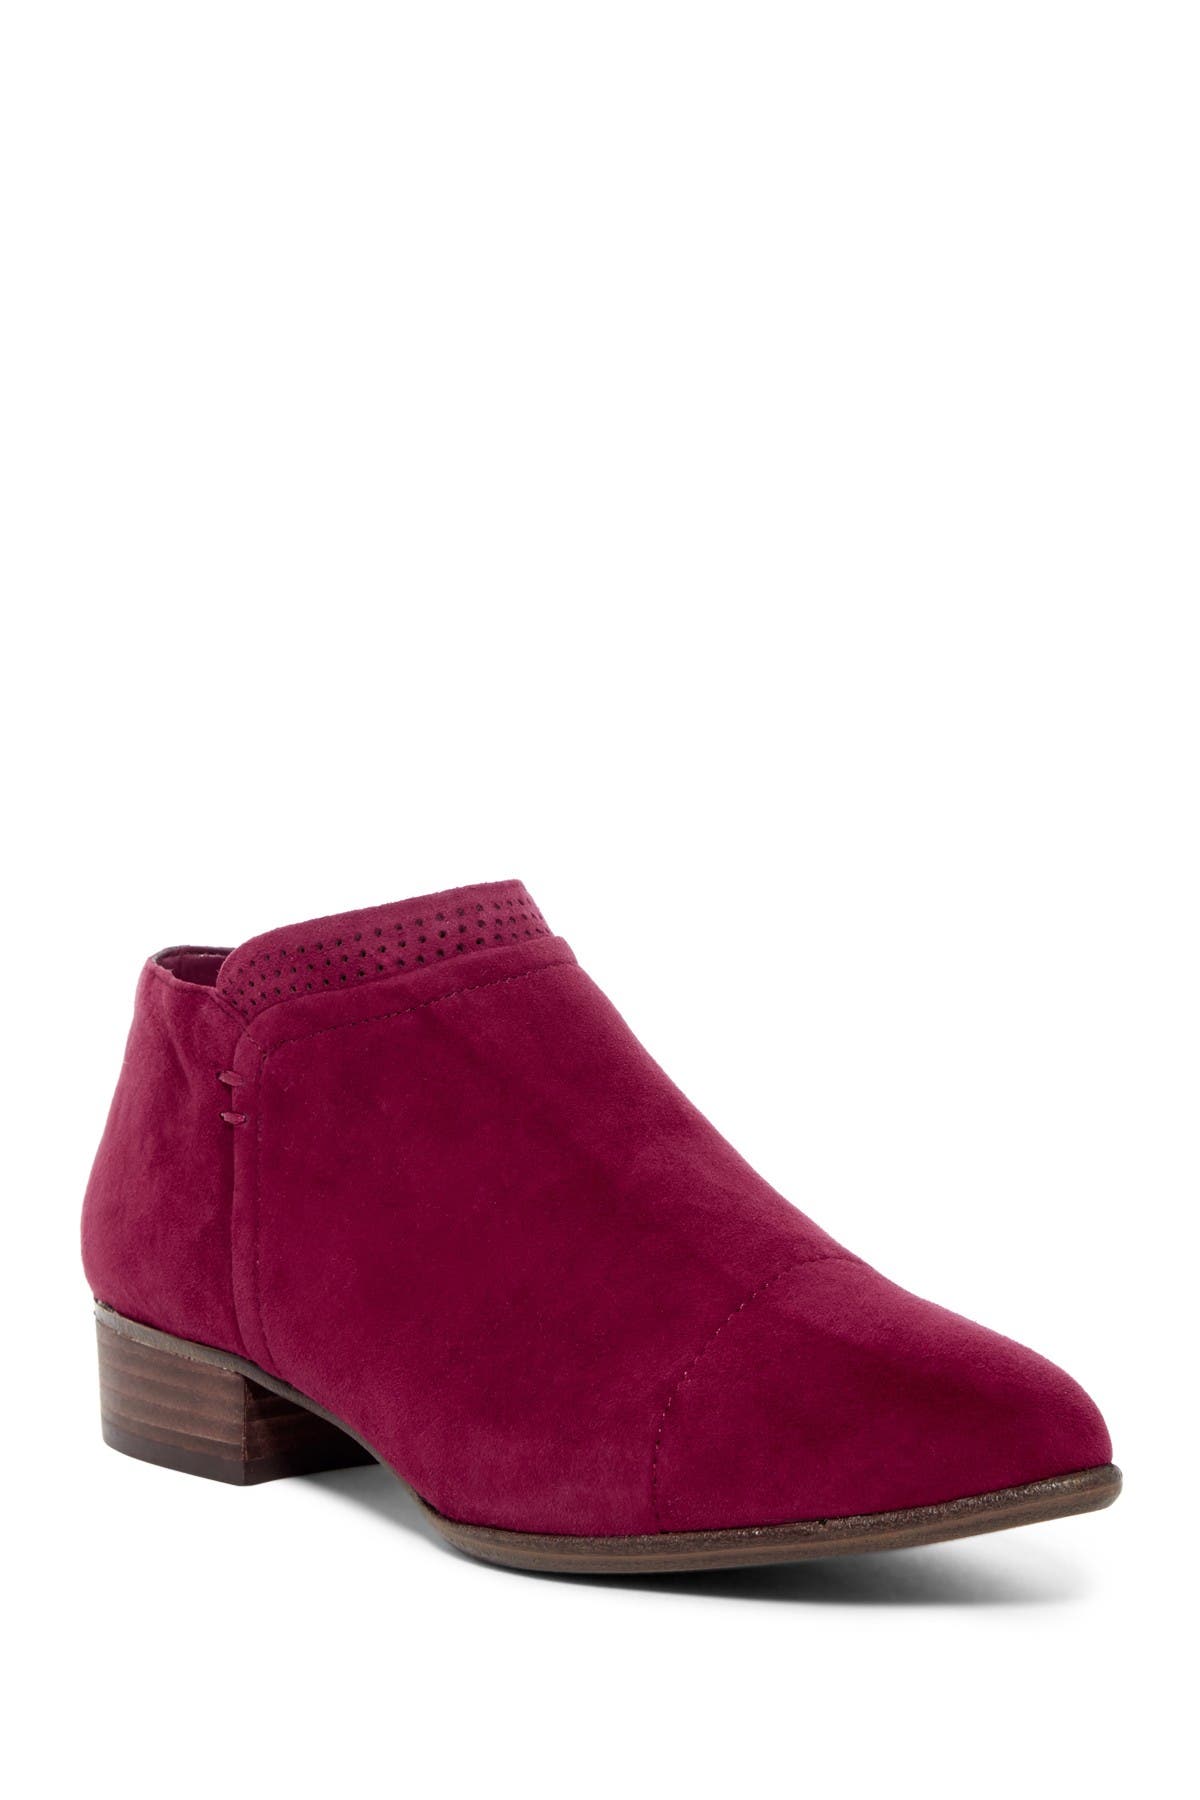 Vince Camuto | Jannie Suede Ankle 